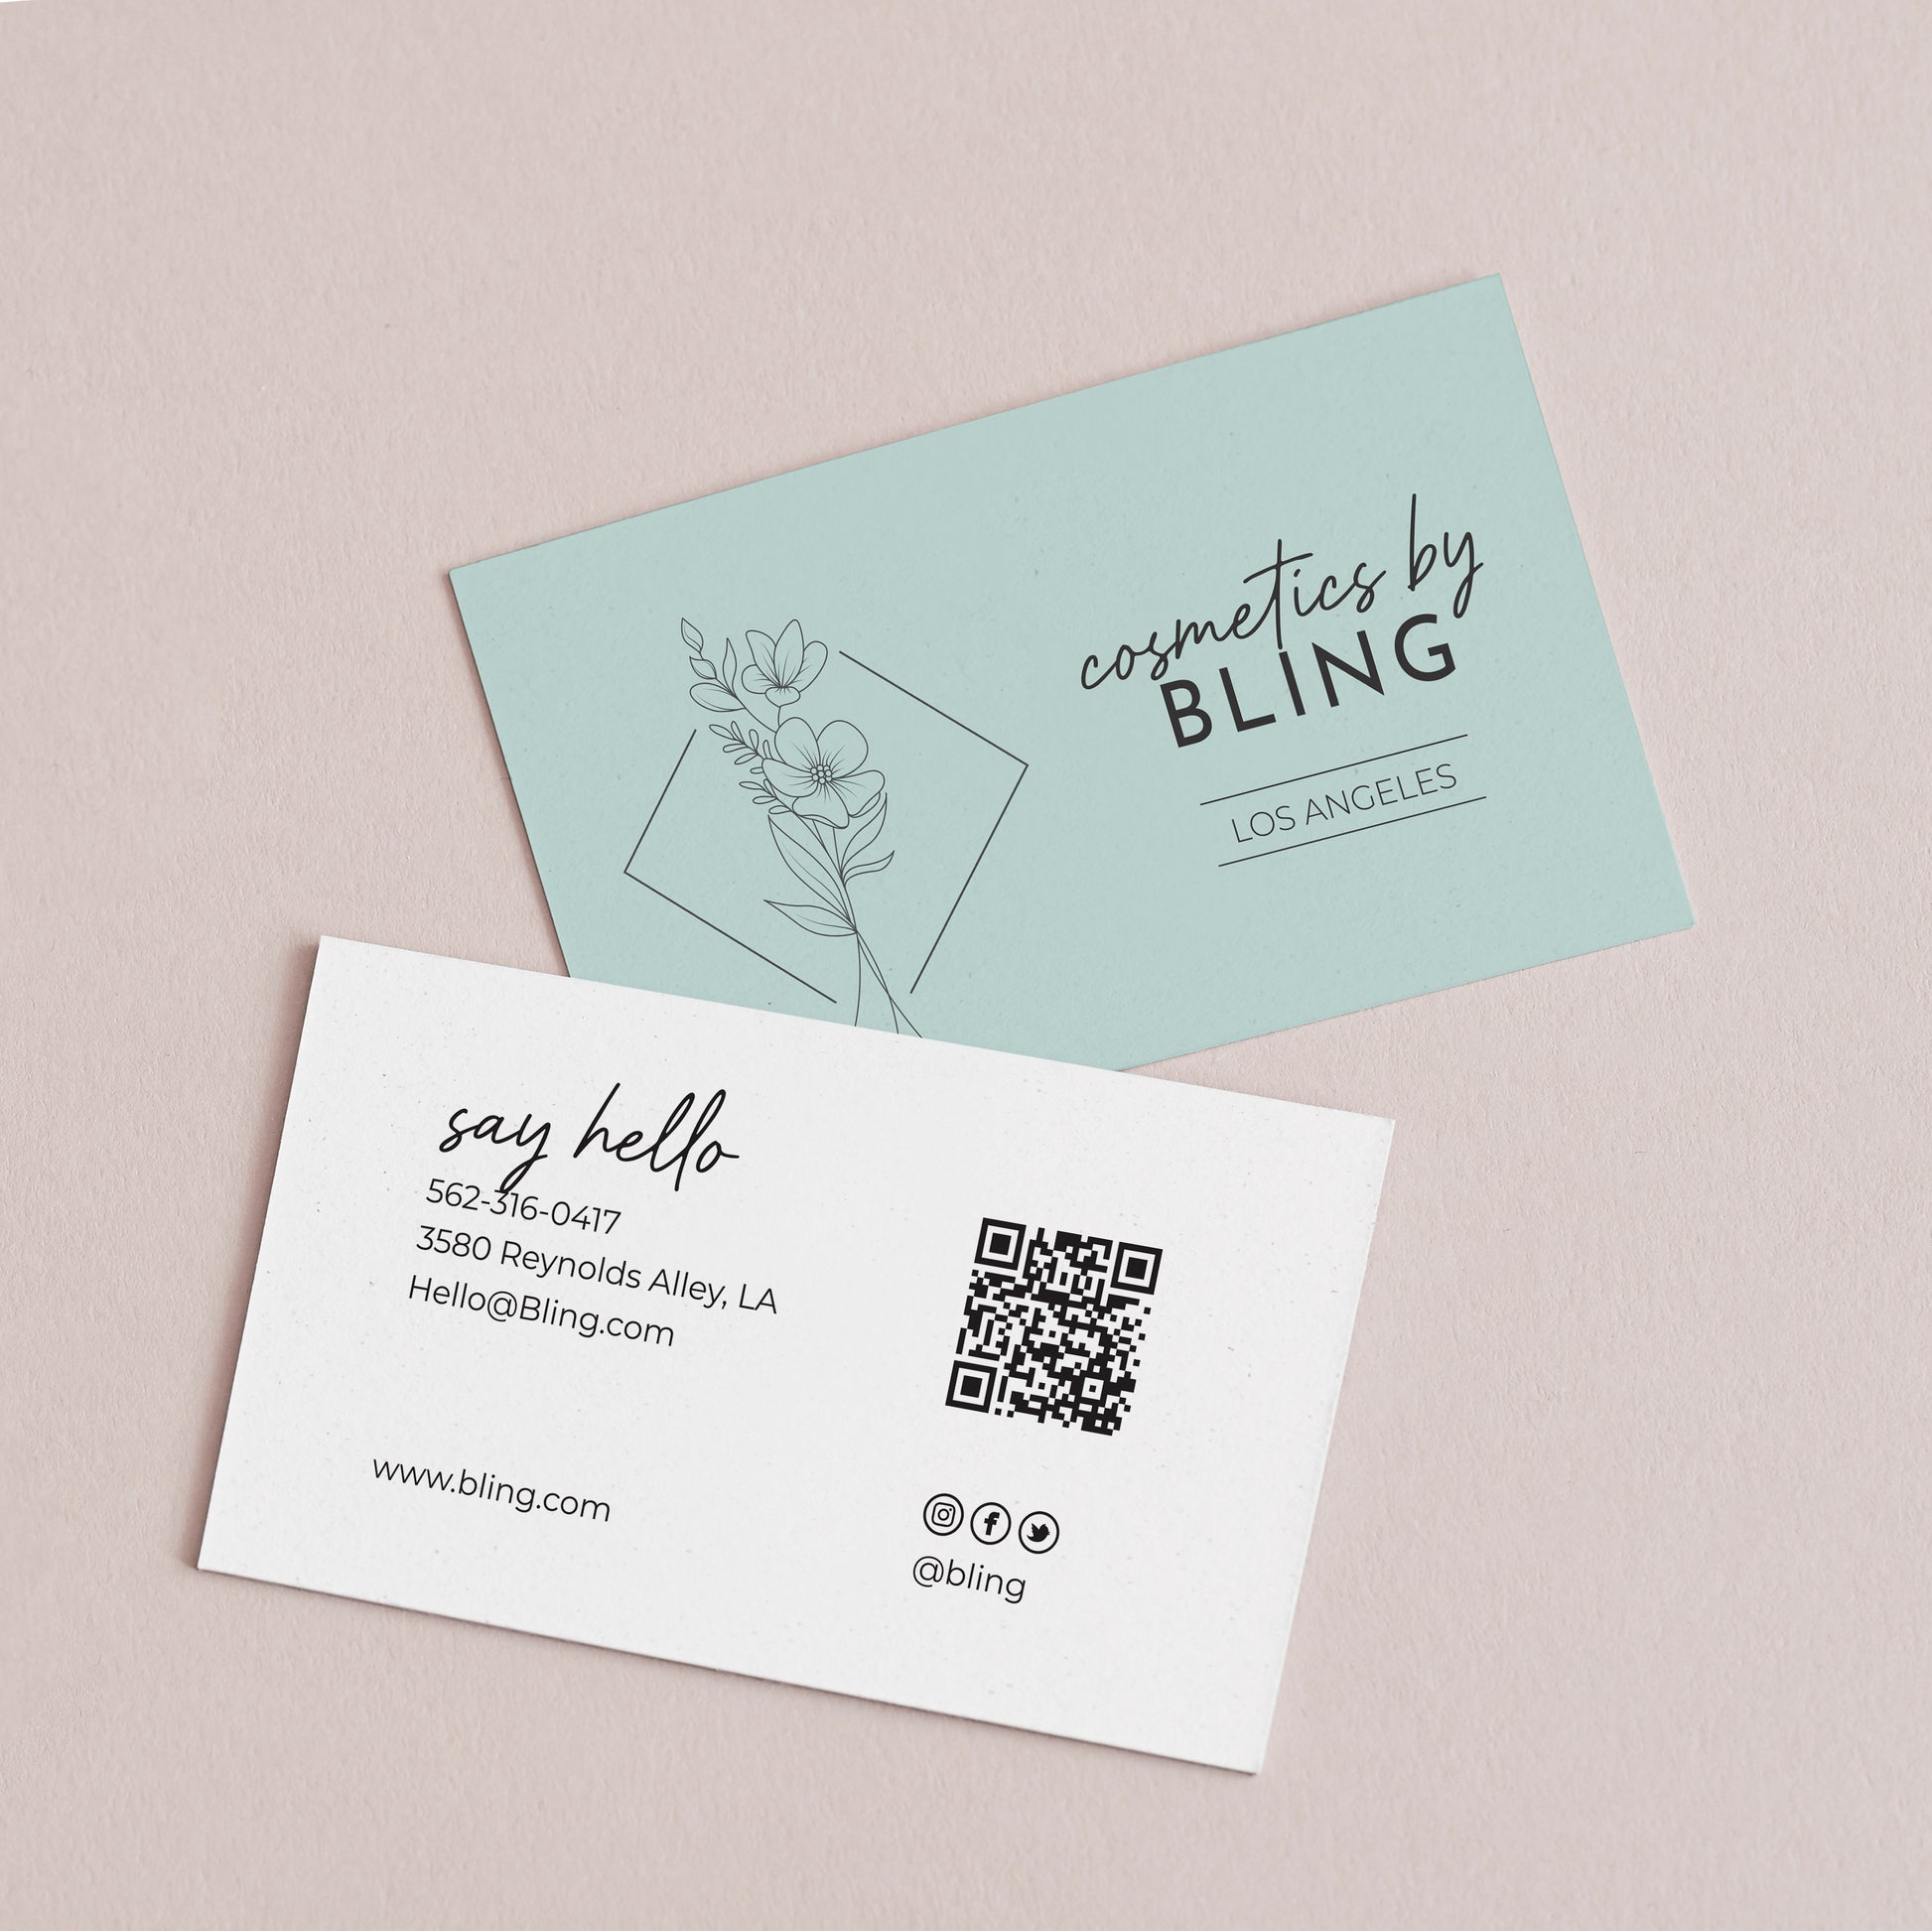 Stylish personalized business cards from XOXOKristen, featuring a floral design, QR code, and a variety of text printing options.